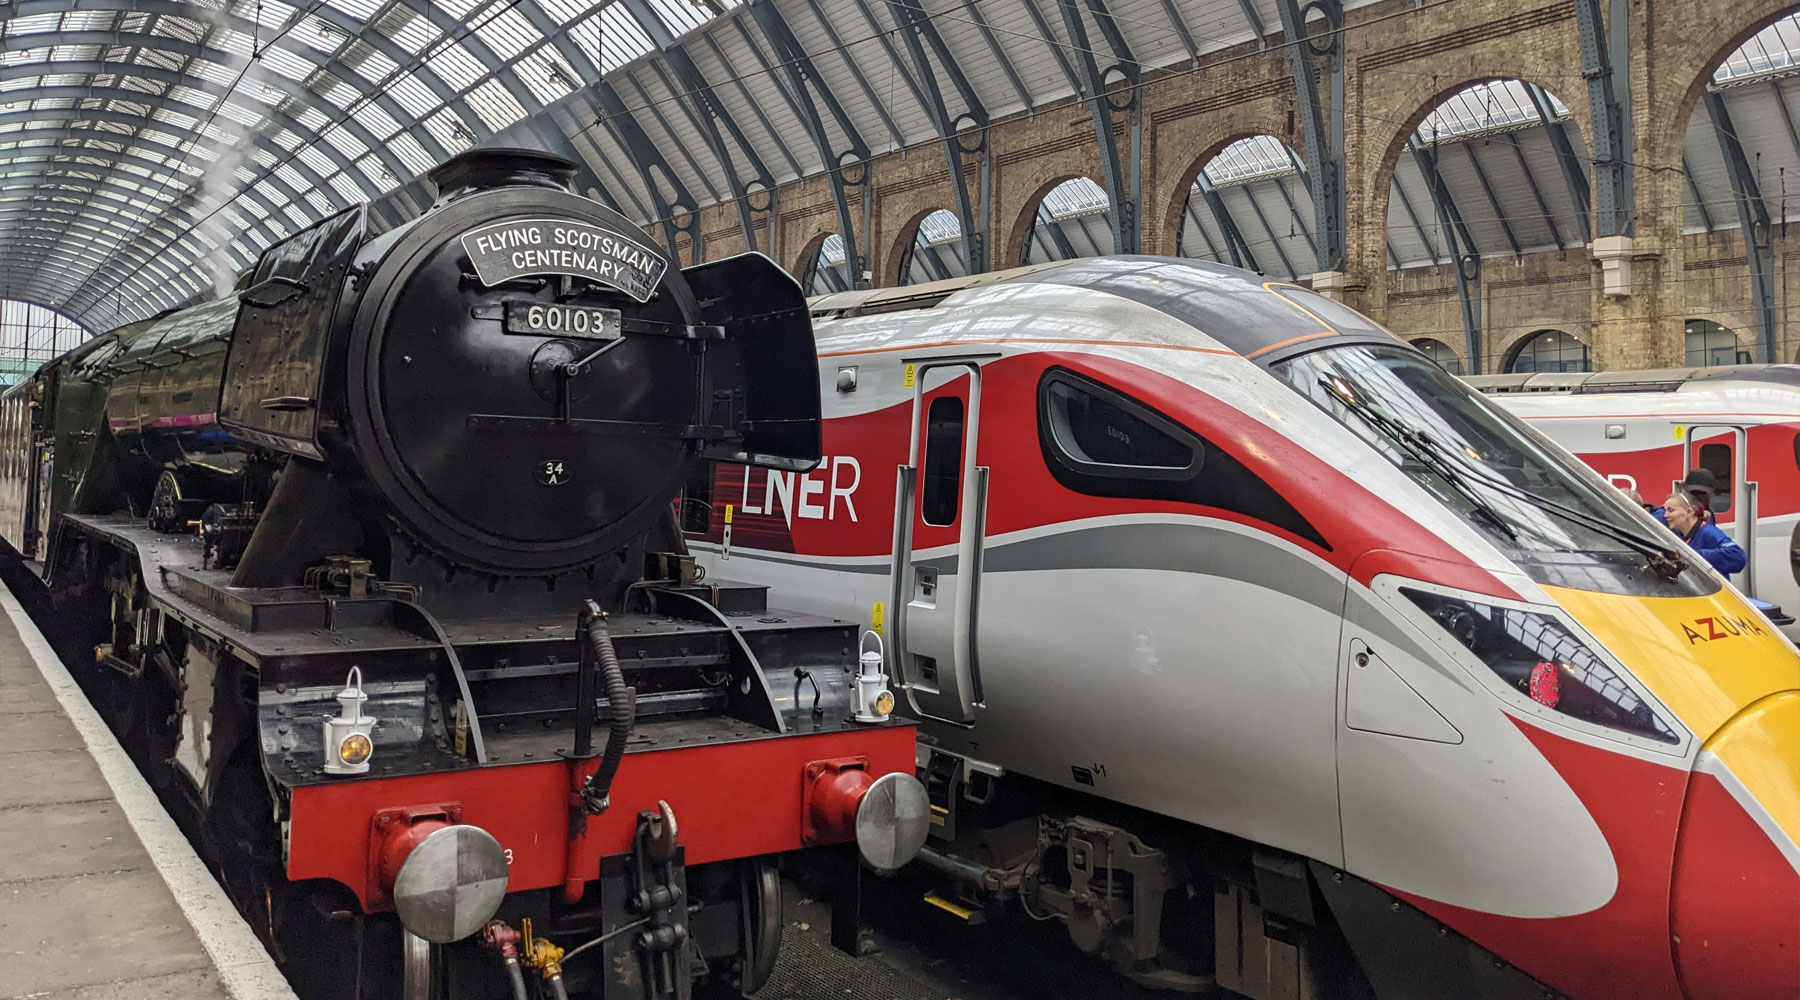 The Flying Scotsman steam train is at King's Cross station this weekend